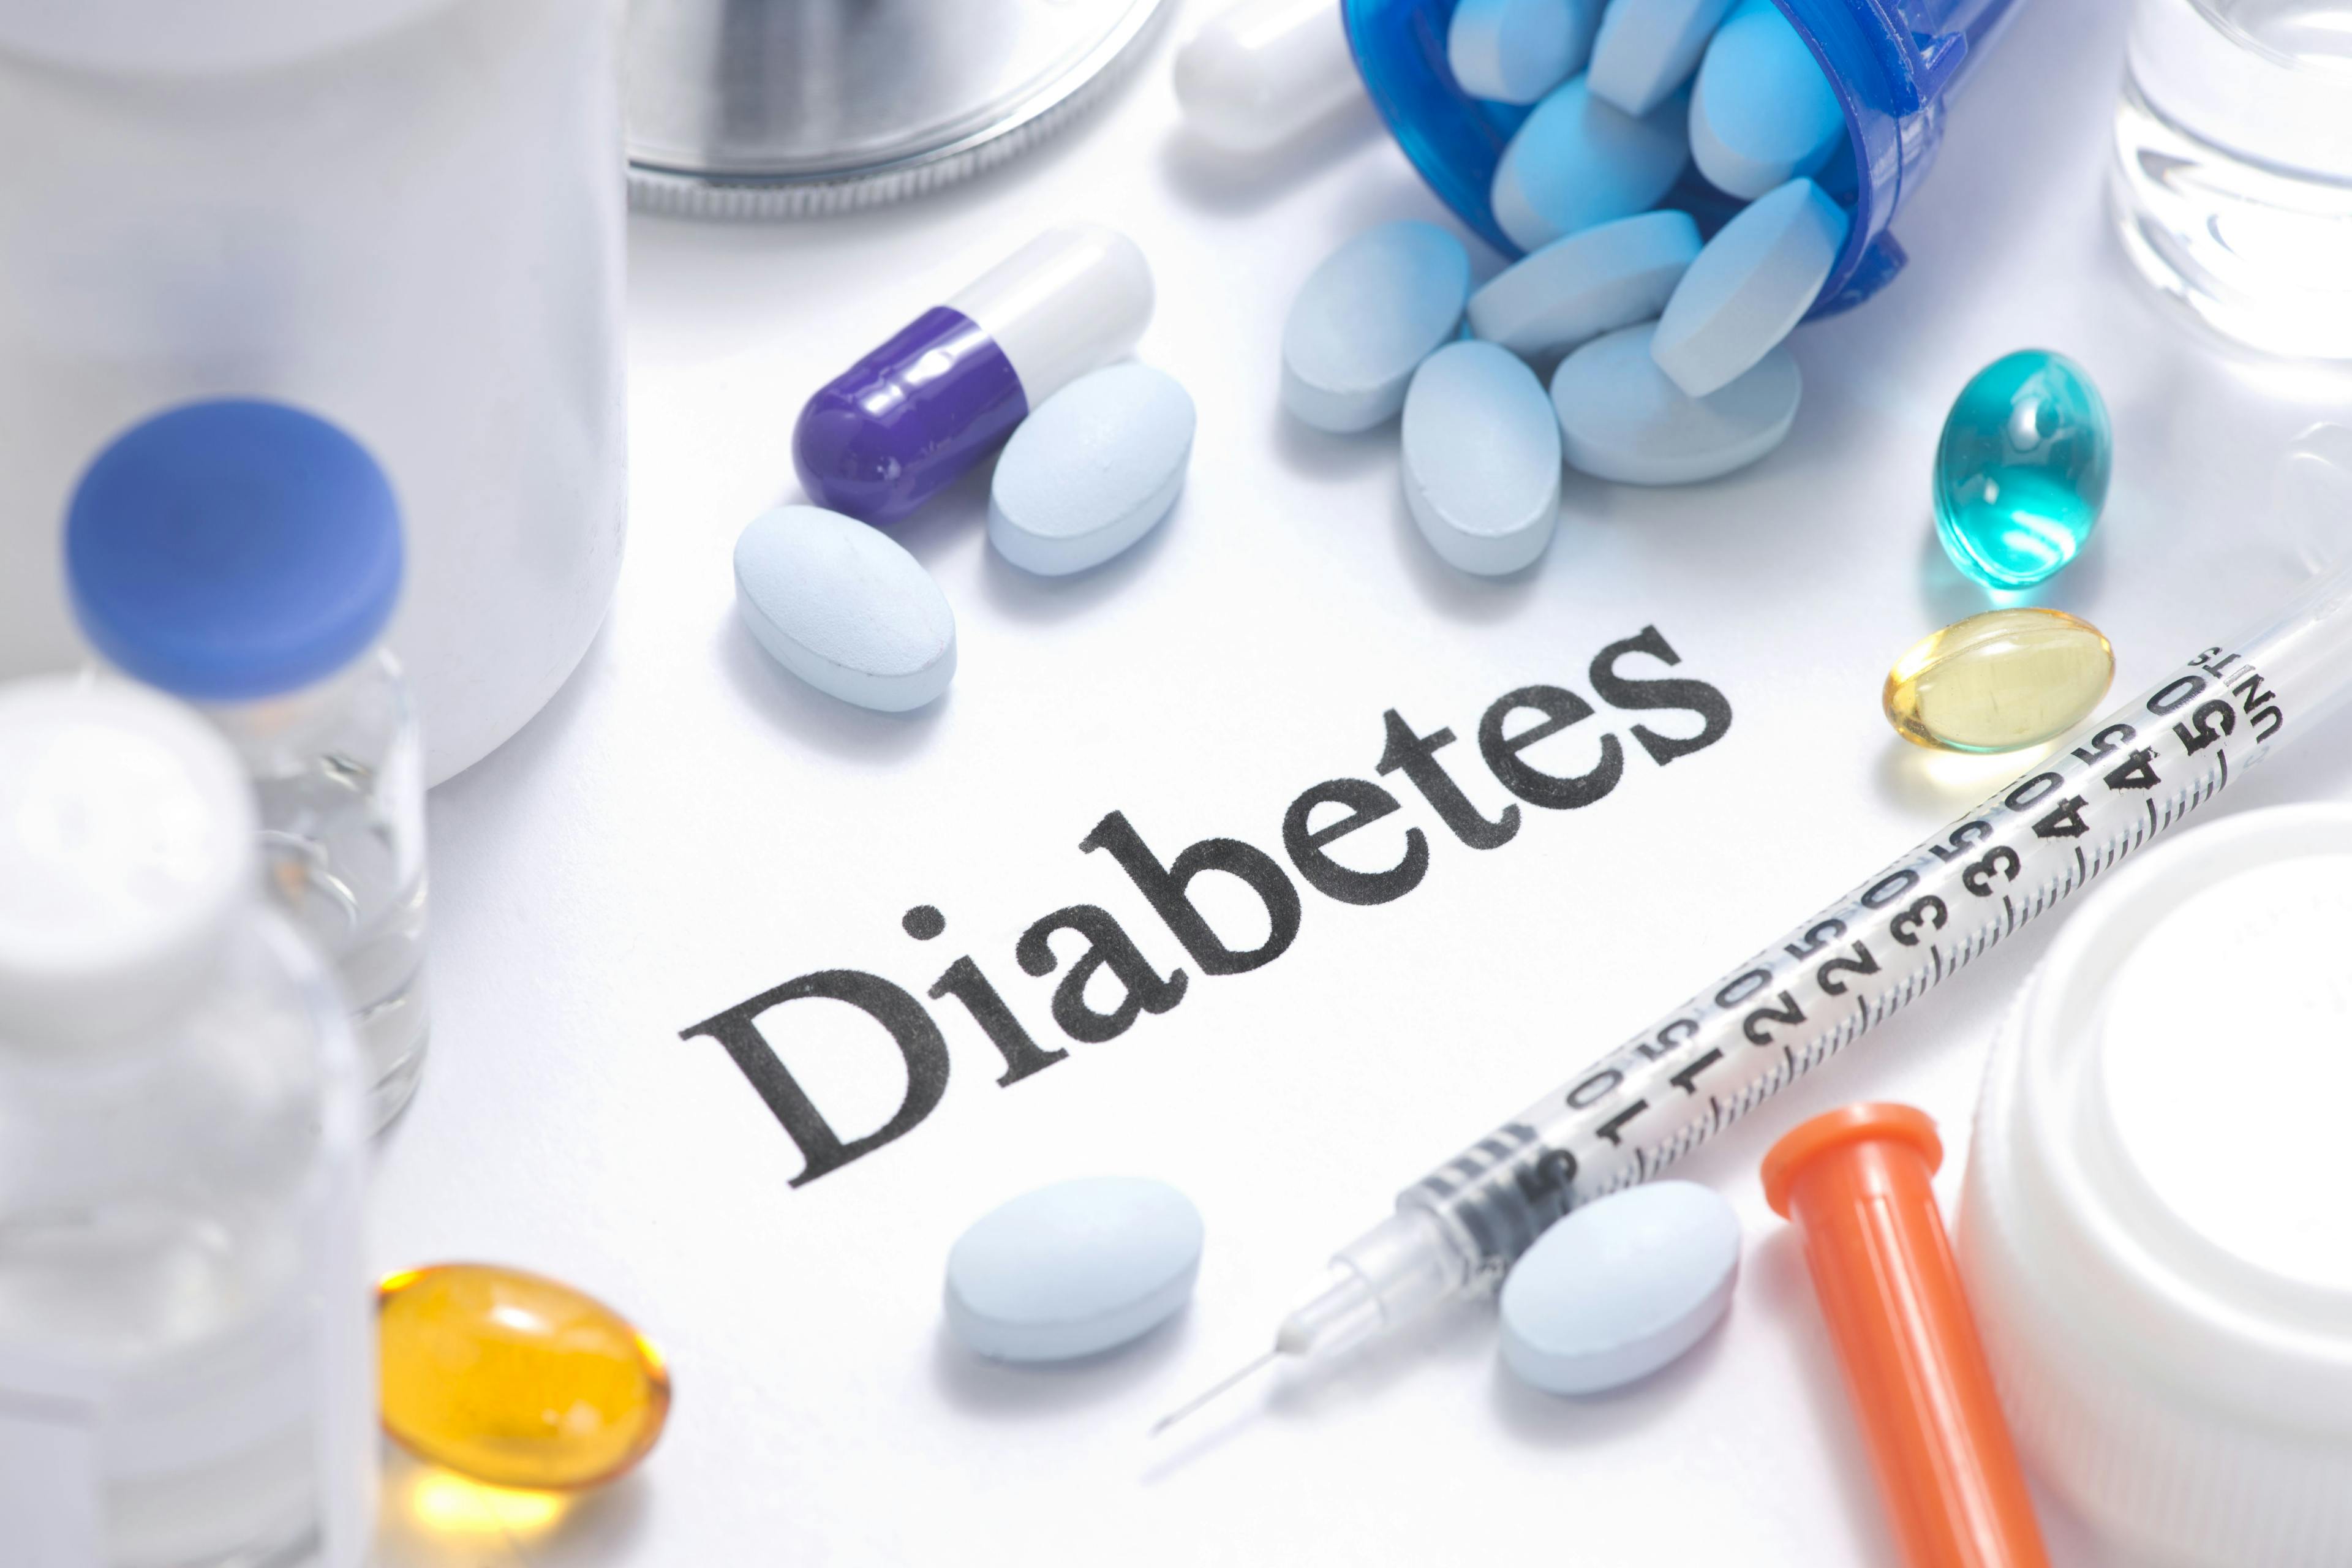 TWILIGHT Analysis Suggests Ticagrelor Monotherapy Preferable in Concomitant Diabetes and CKD